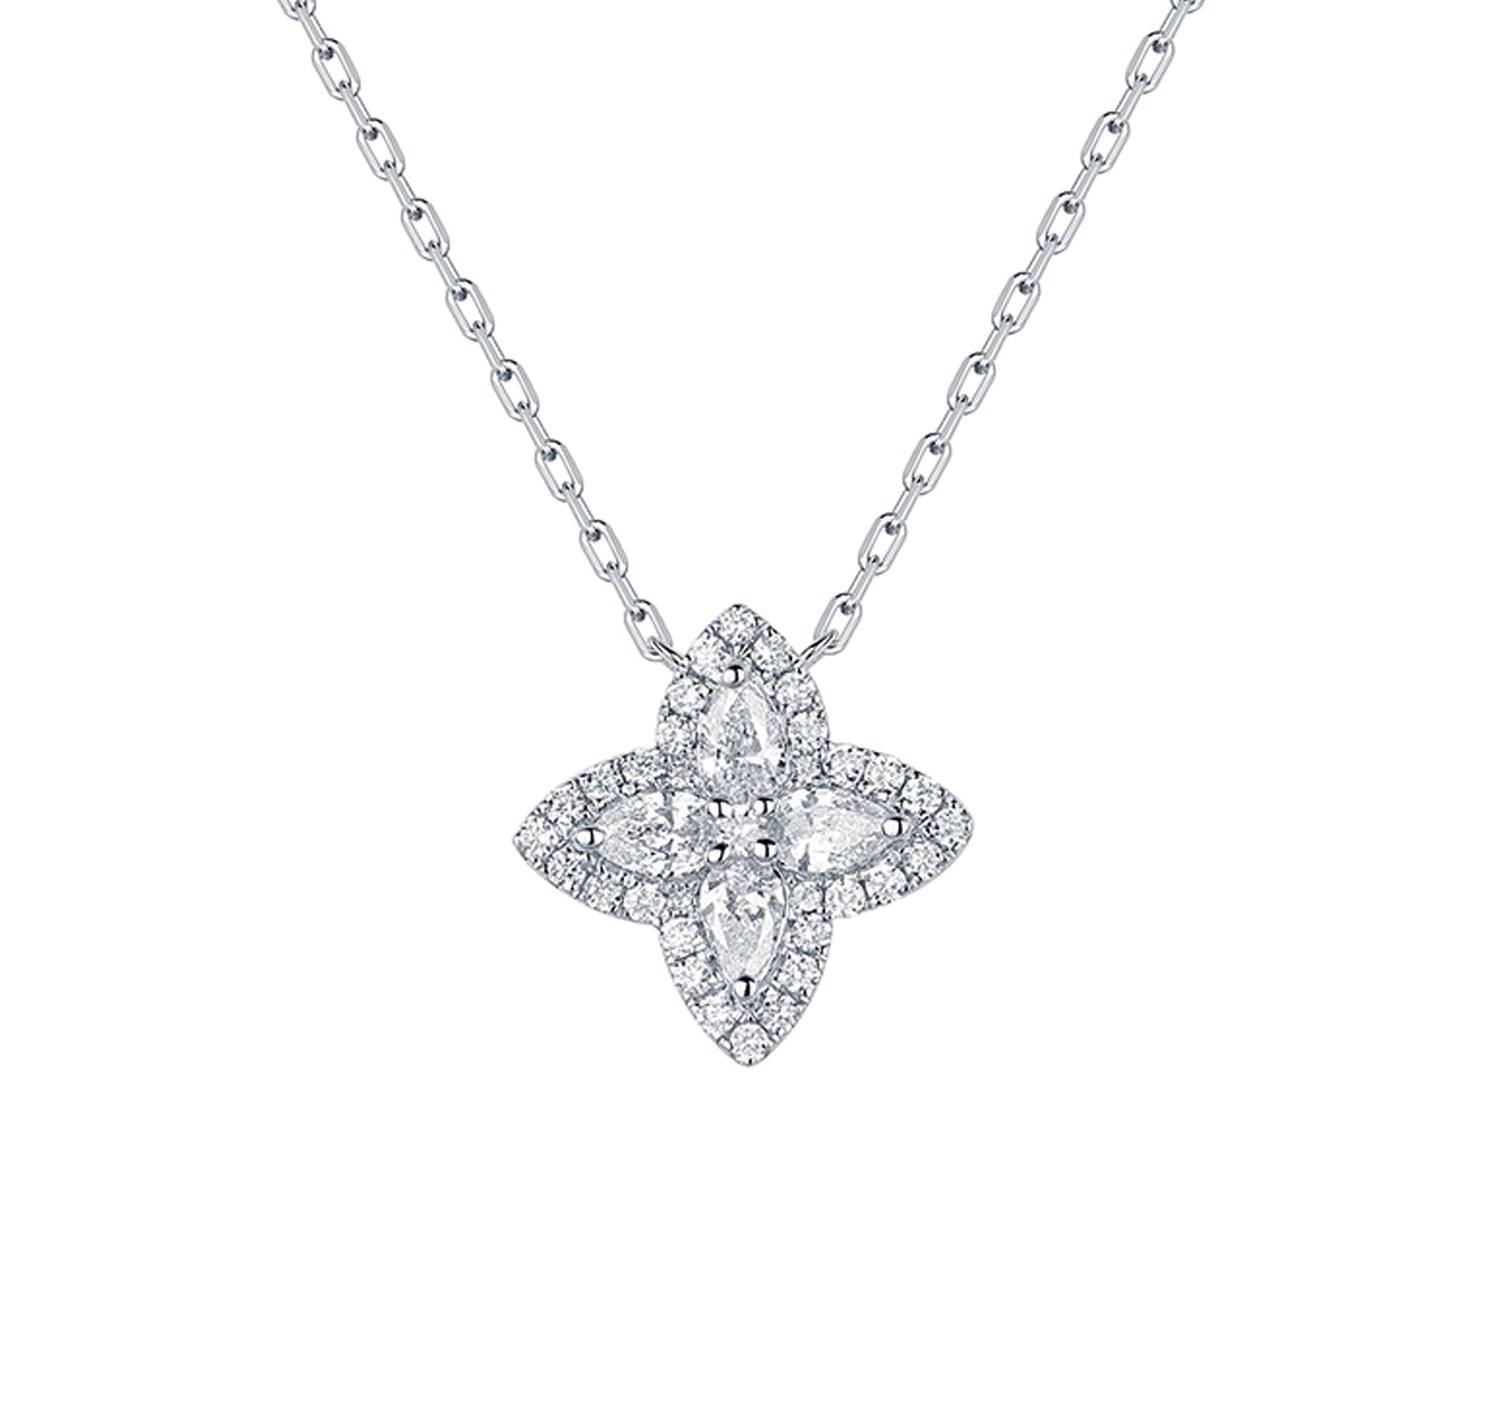 On the rocks: Louis Vuitton Blossom necklace